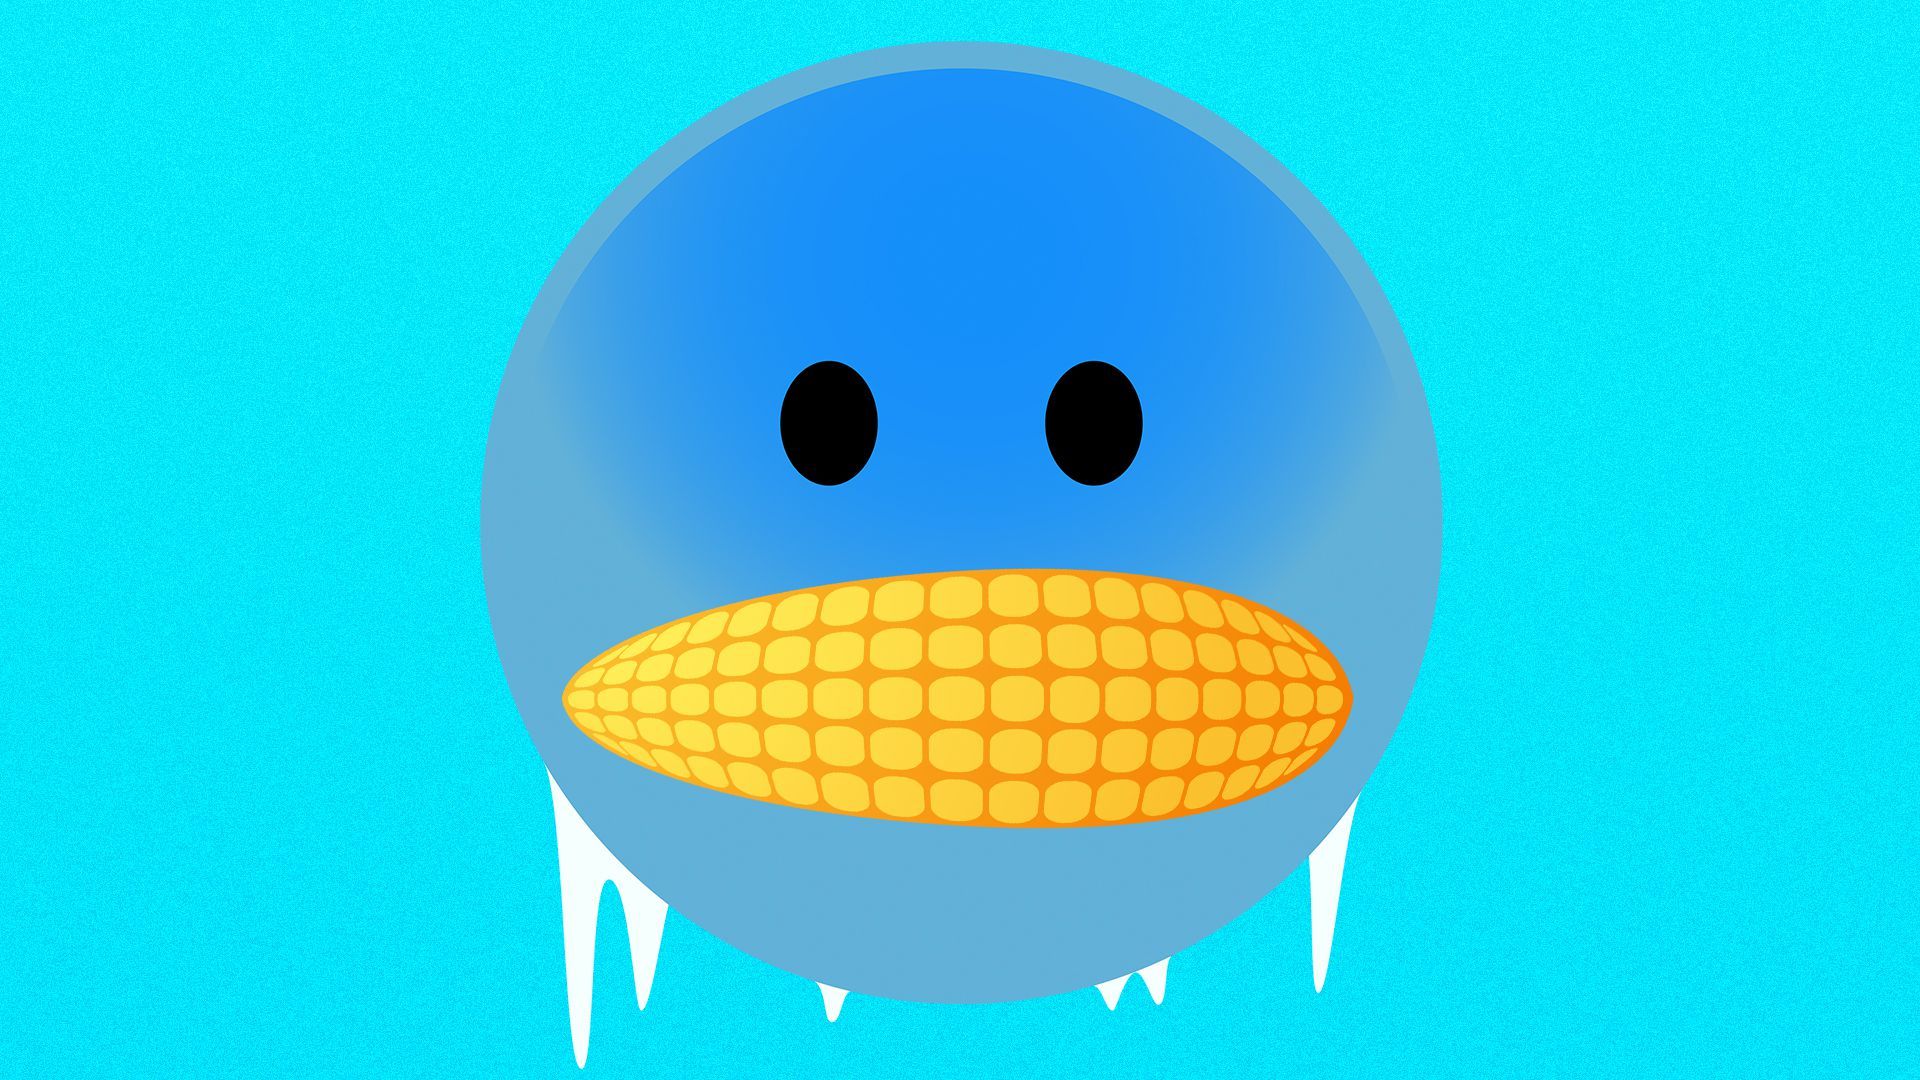 Illustration of a cold emoji with an ear of corn instead of teeth.